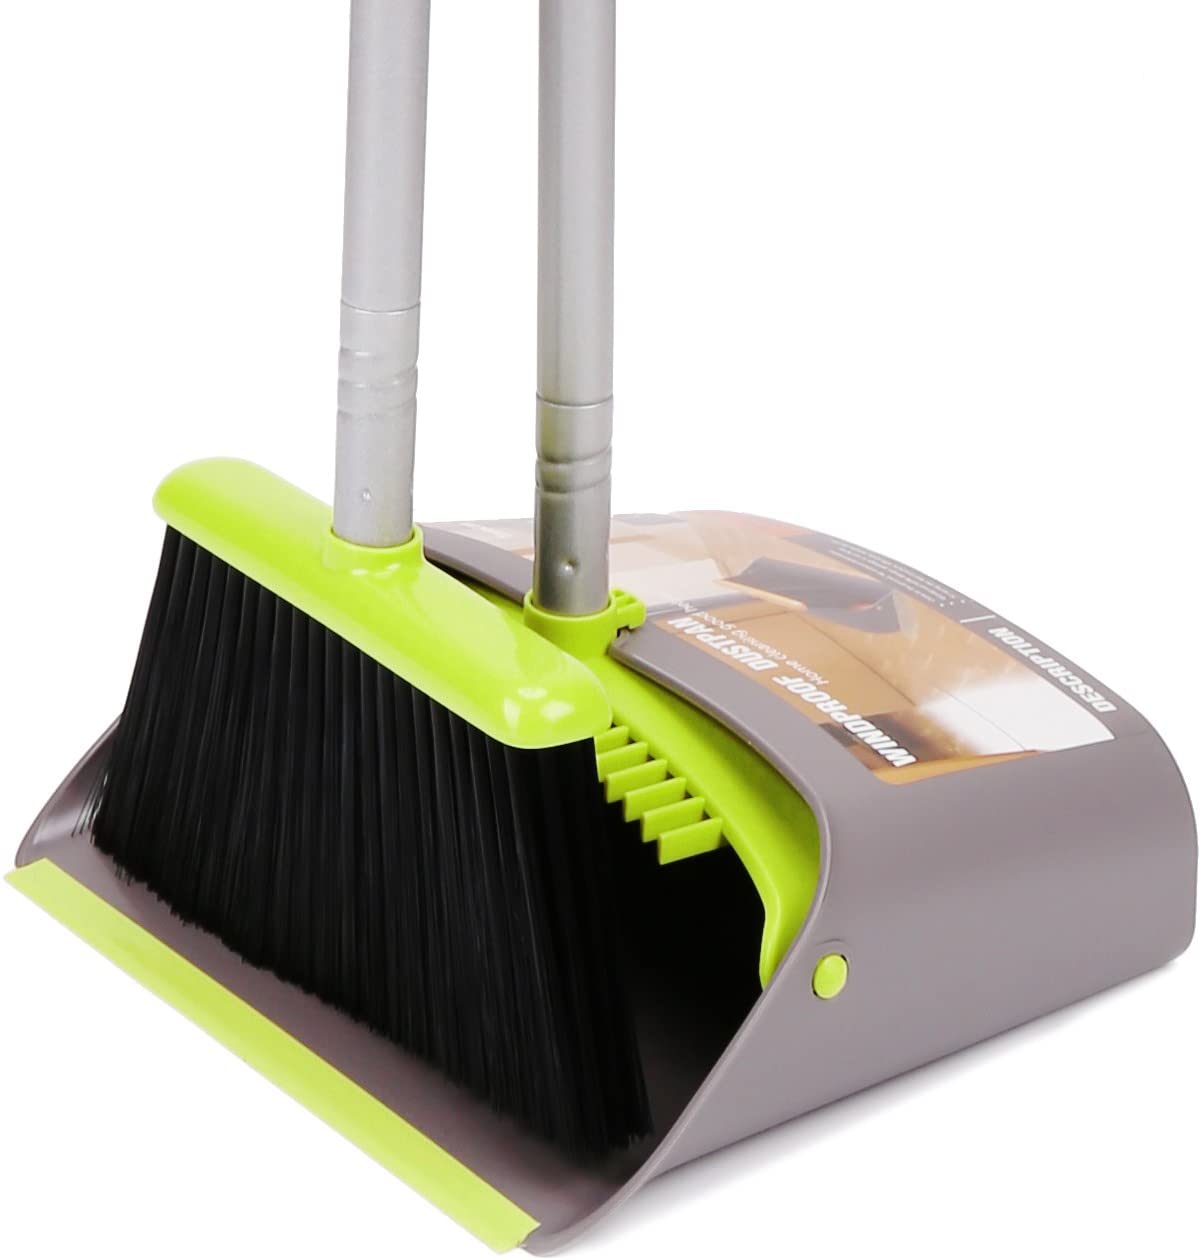 SANGFOR Dust Pan and Broom Set Cleans Broom and Dustpan Set Upright